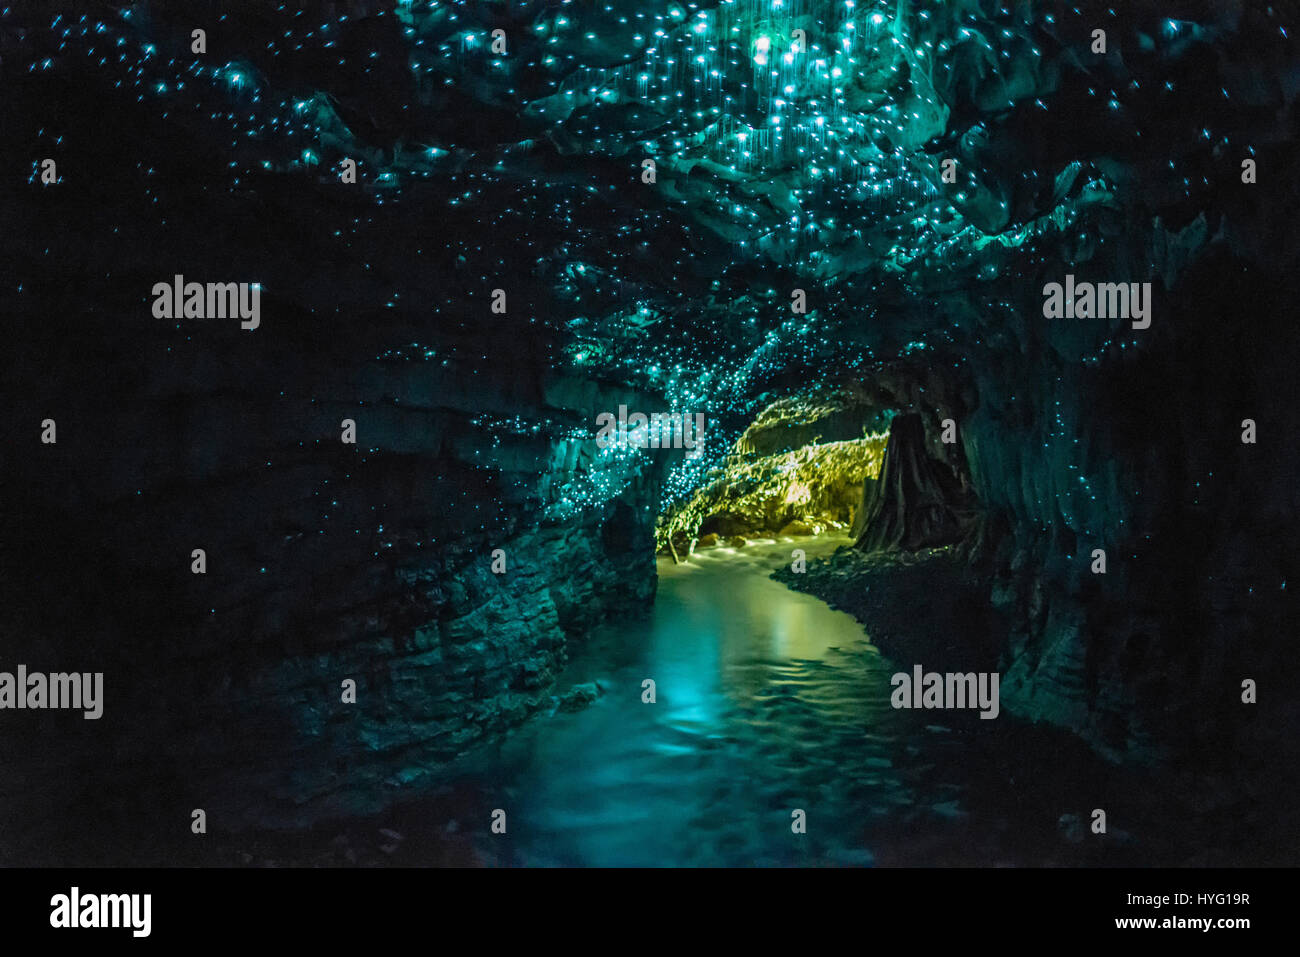 New Zealand, North island - Waitomo Glowworm Cave. TRAVELLING a million-miles around the planet this photographer has completed his quest to show the alien side to the Earth. From celestial auroras to fiery craters and cosmic seas, these pictures taken from around the world make our homely planet look like an extra-terrestrial world. Photographer Martin Rietze, 50, has travelled forty times around the planet over the past ten-years, visiting more than 50 countries across all seven continents, often risking his life to document these spectacular moments. Stock Photo